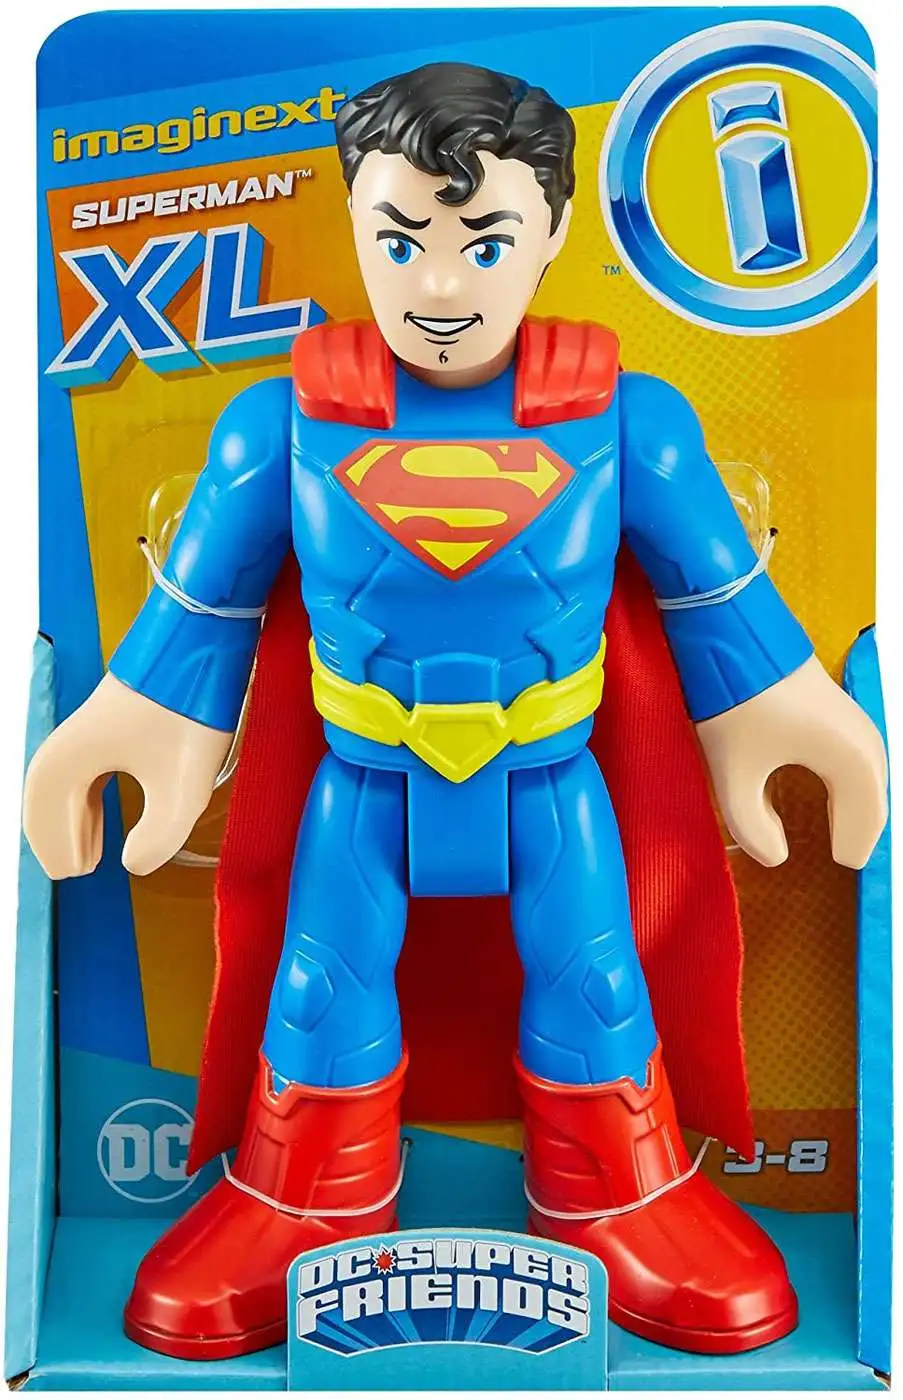 Select your figures Fisher Price IMAGINEXT DC Super Friends Justice League 